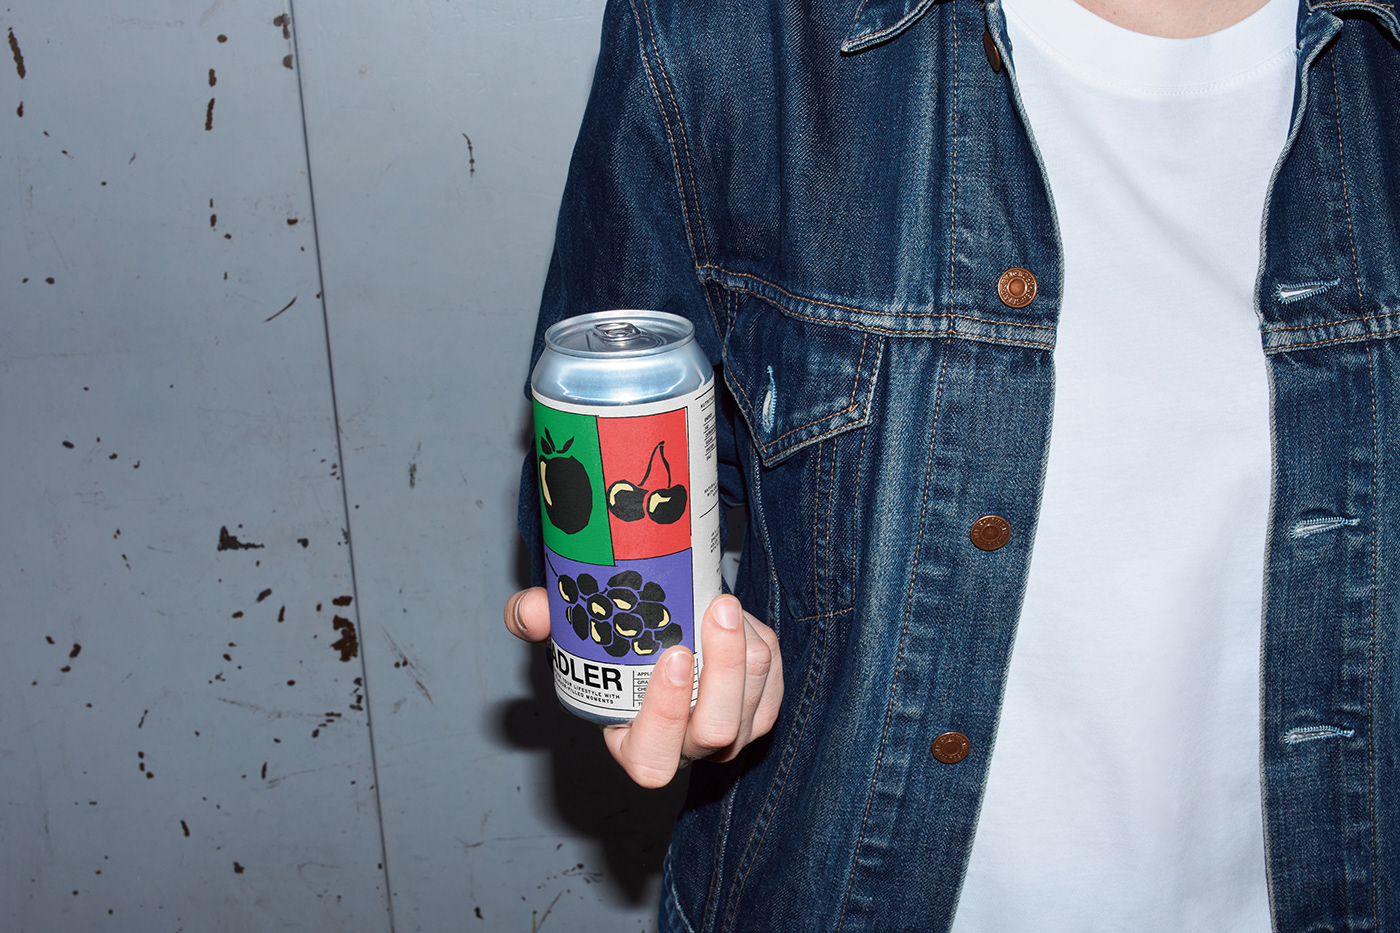 A photo of a can in hand in a  urban setting in a design brutal style. 